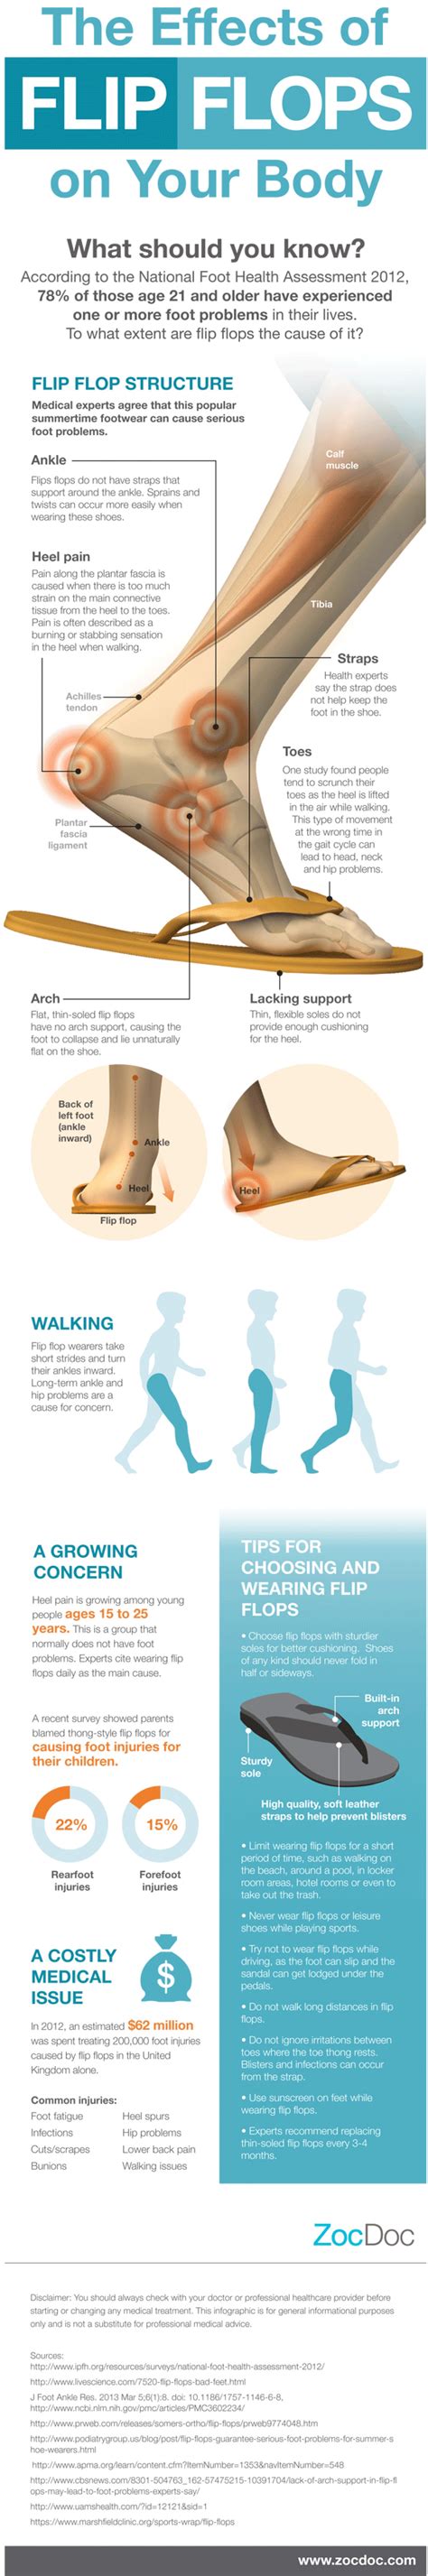 How Wearing Flip Flops Can Affect Your Health Infographic